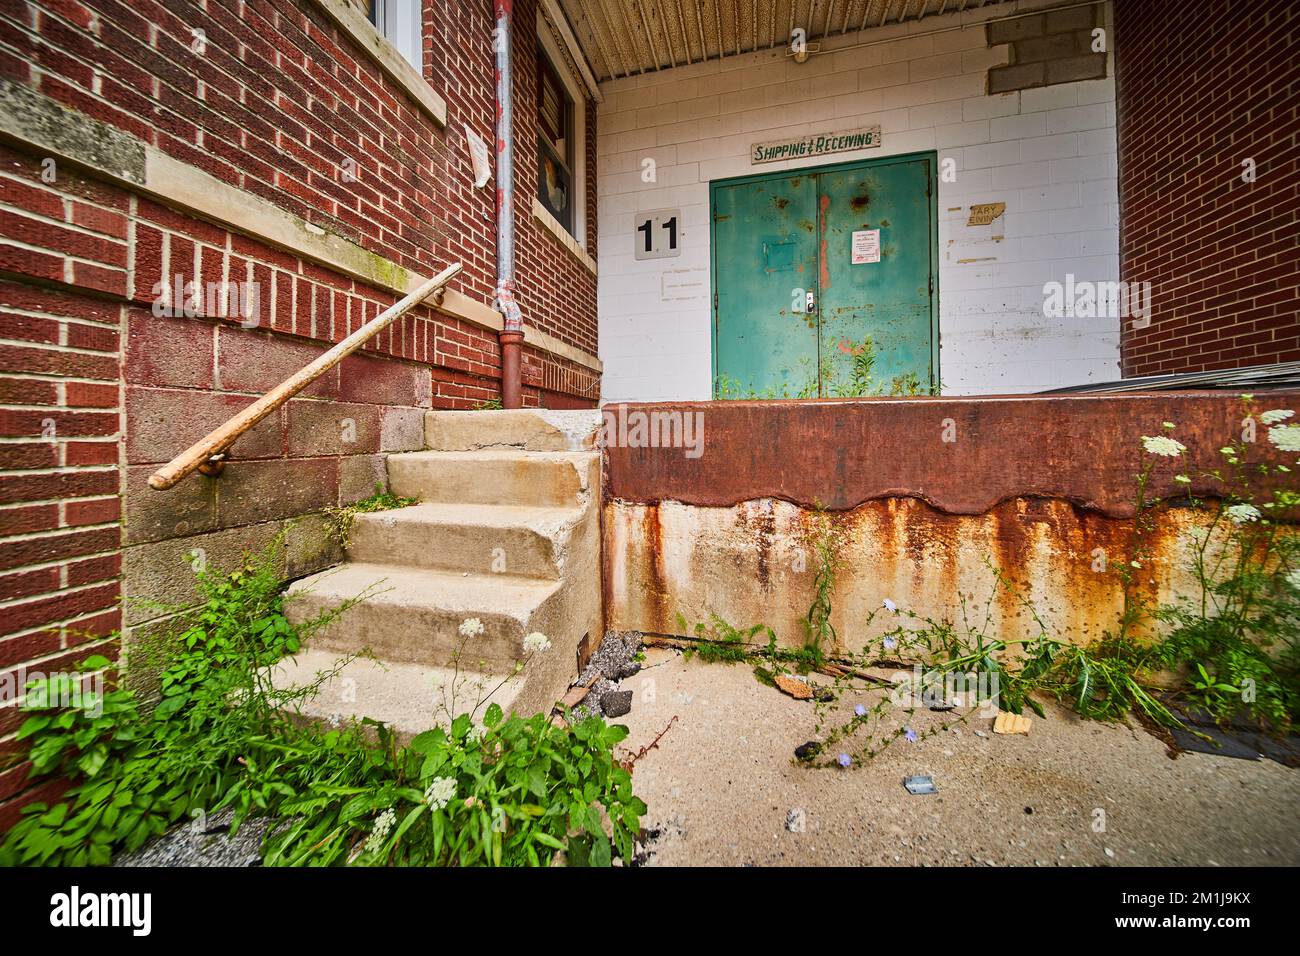 Abandoned building back shipping receiving entrance with brick, rust, and cement steps Stock Photo